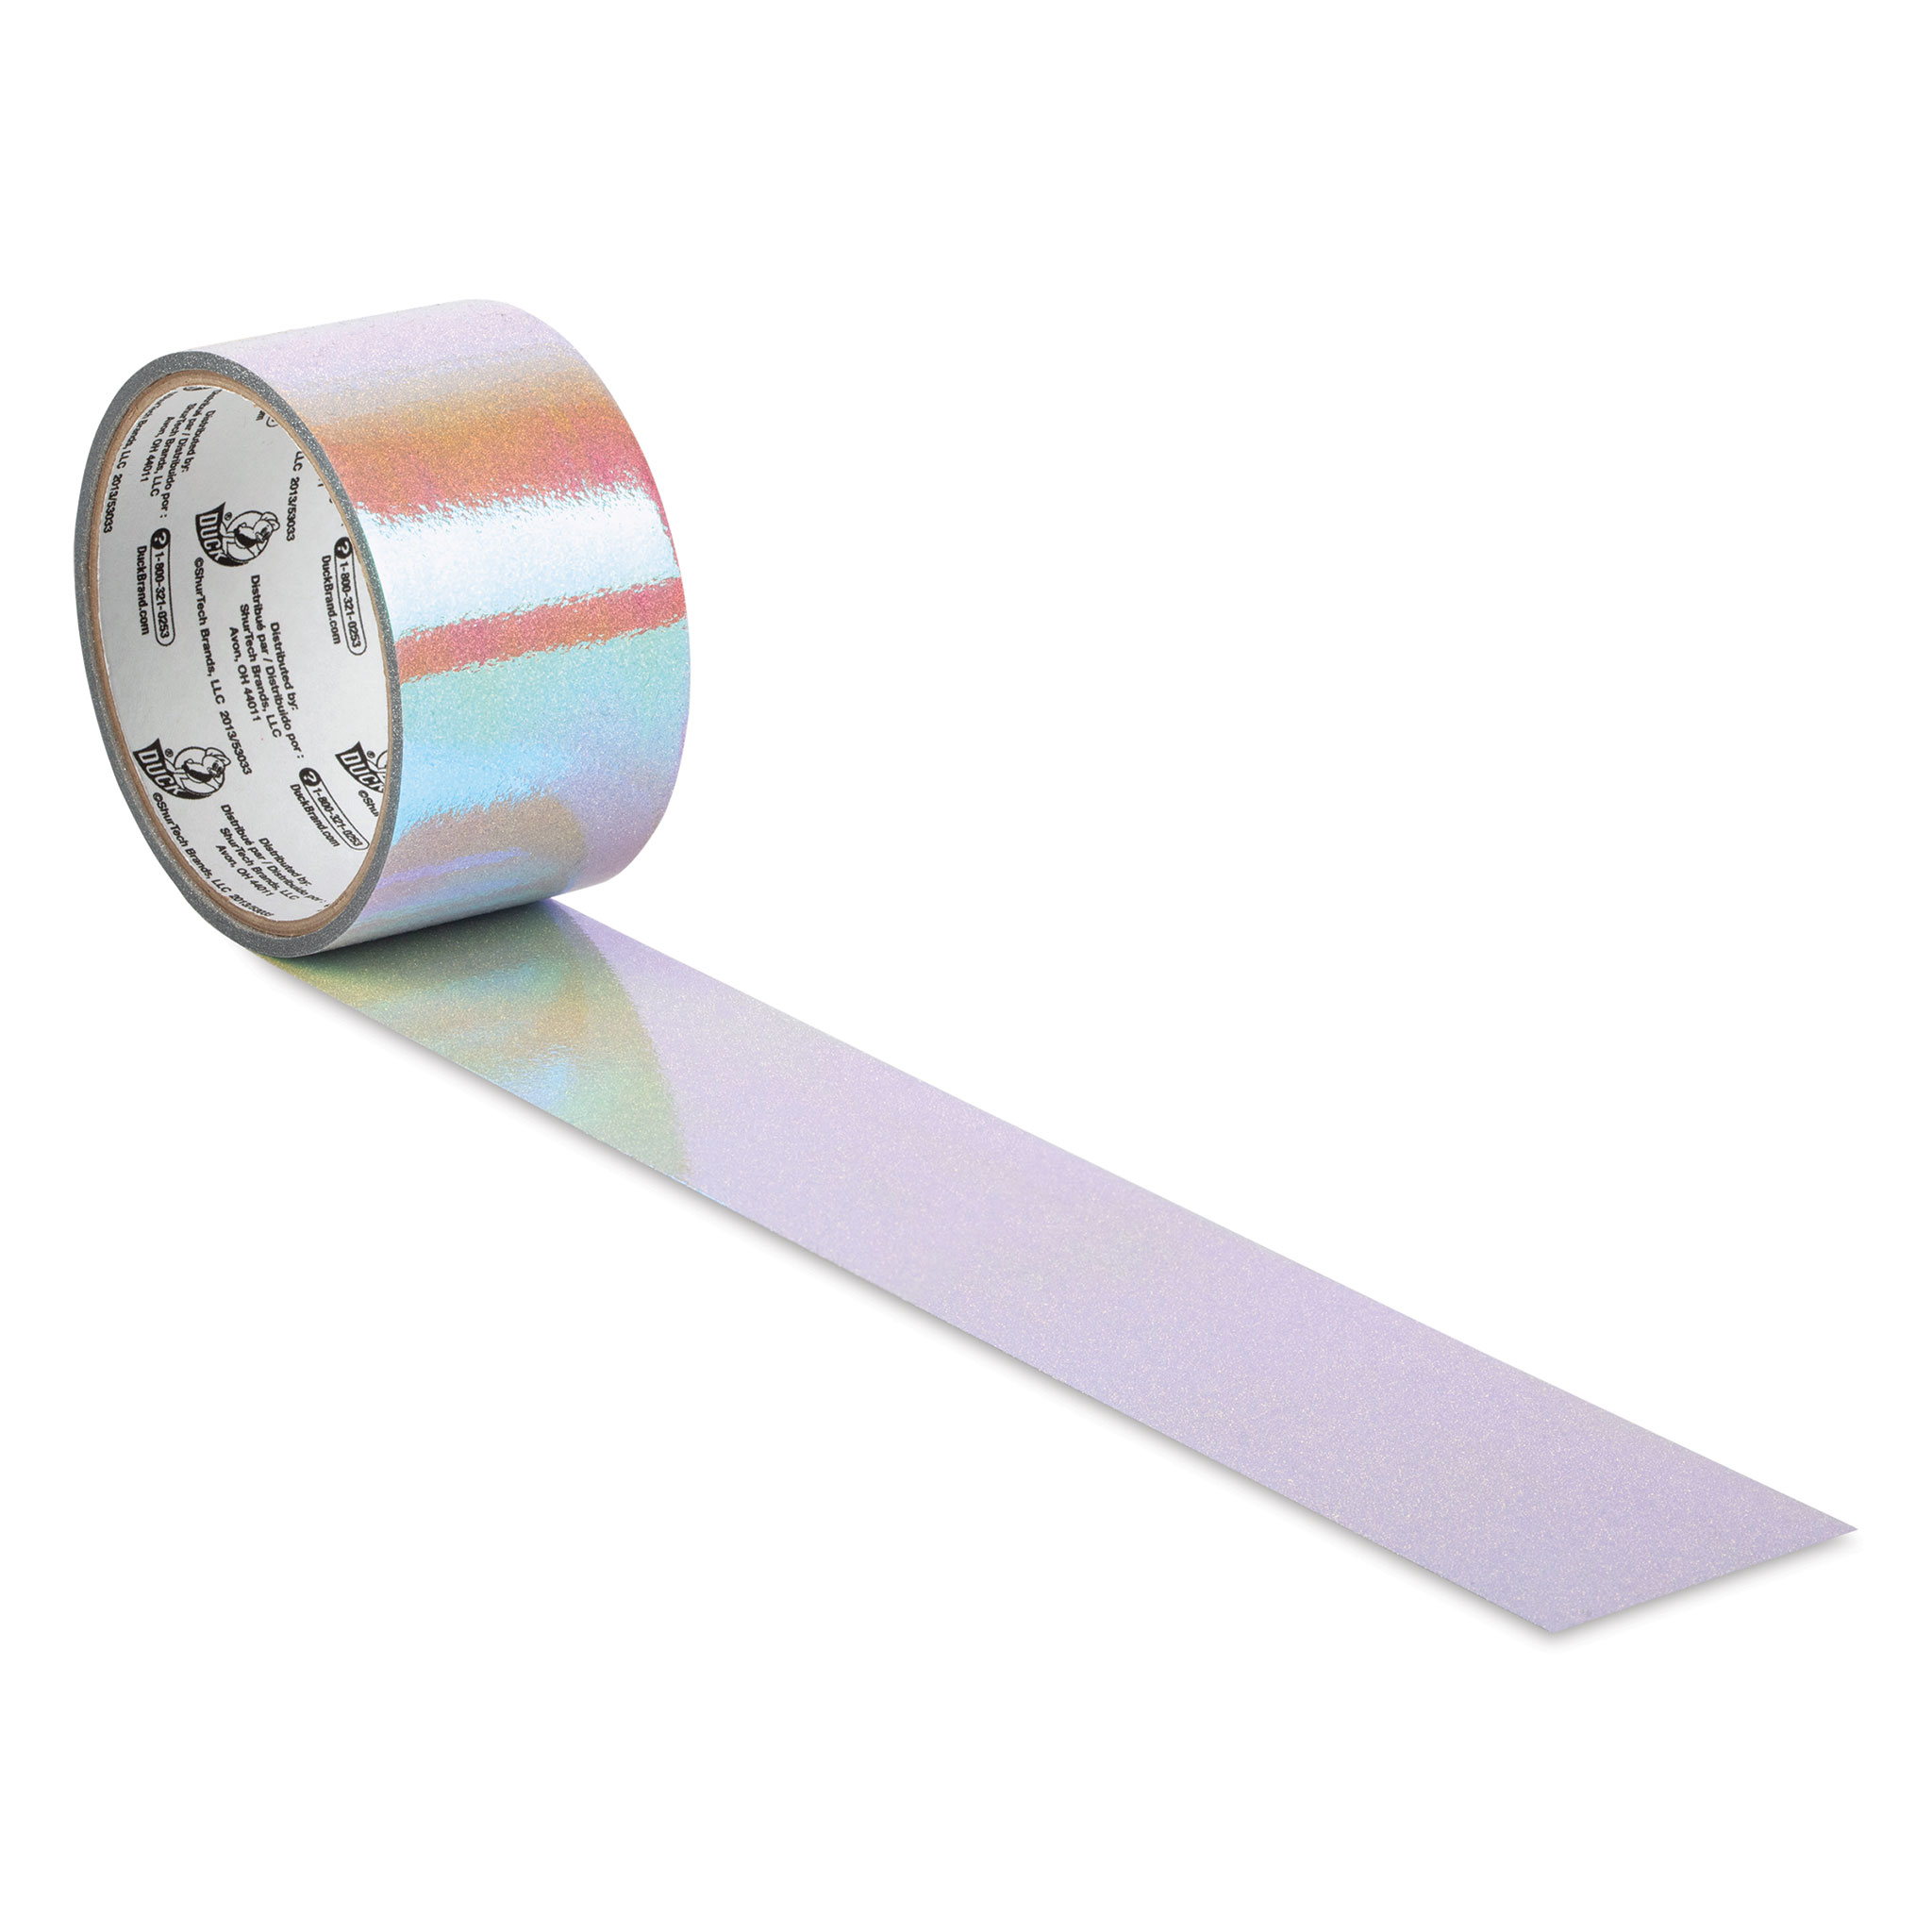 35mm x 50m Prism Tape, Holographic Reflective Self Adhesive for DIY Art  Craft Wrapping Decoration, Silver